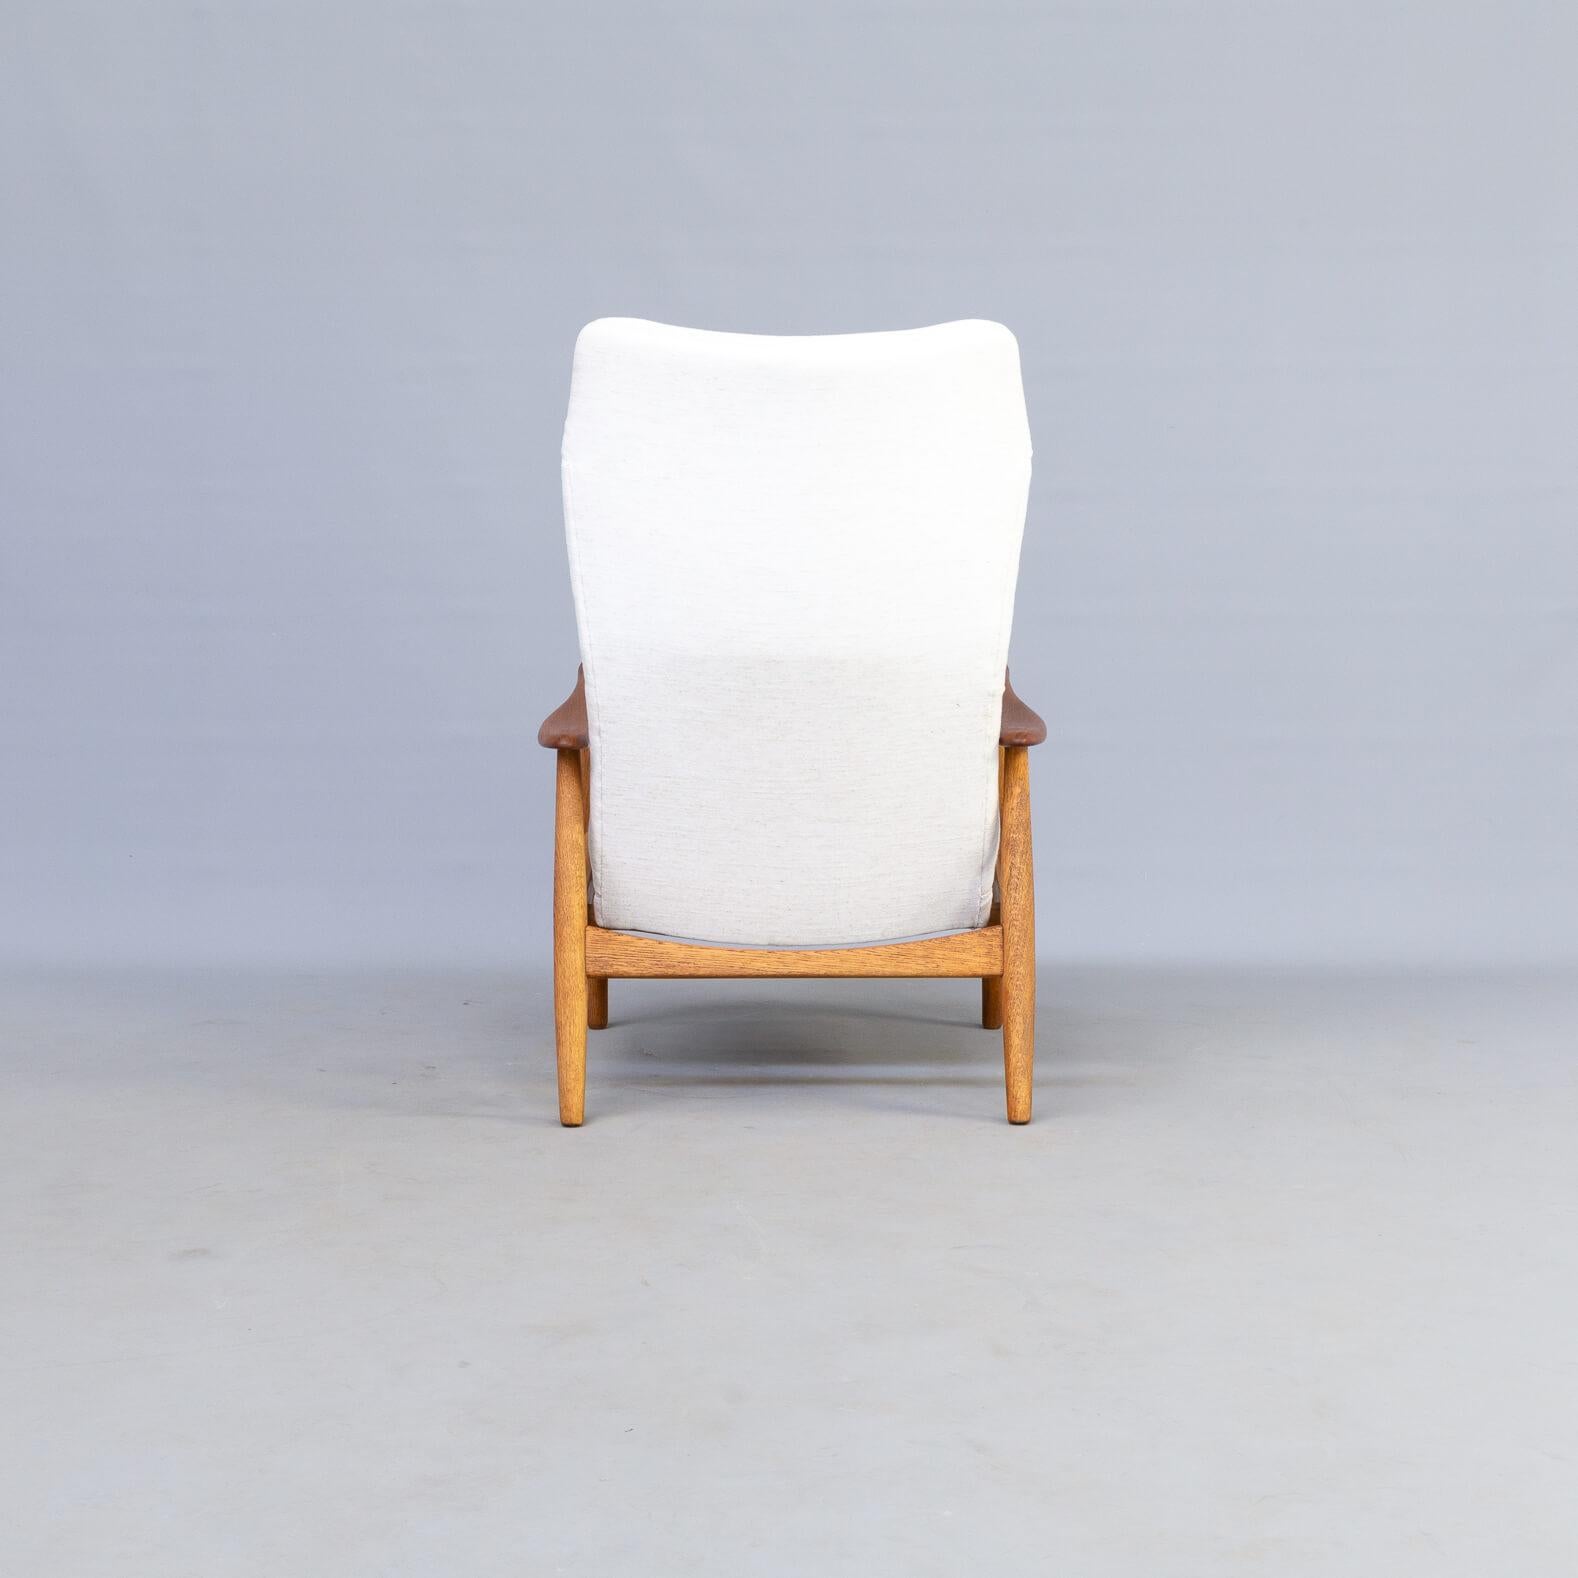 1950s Madsen & Schubell ‘Tove’ Fauteuil for Bovenkamp In Good Condition For Sale In Amstelveen, Noord